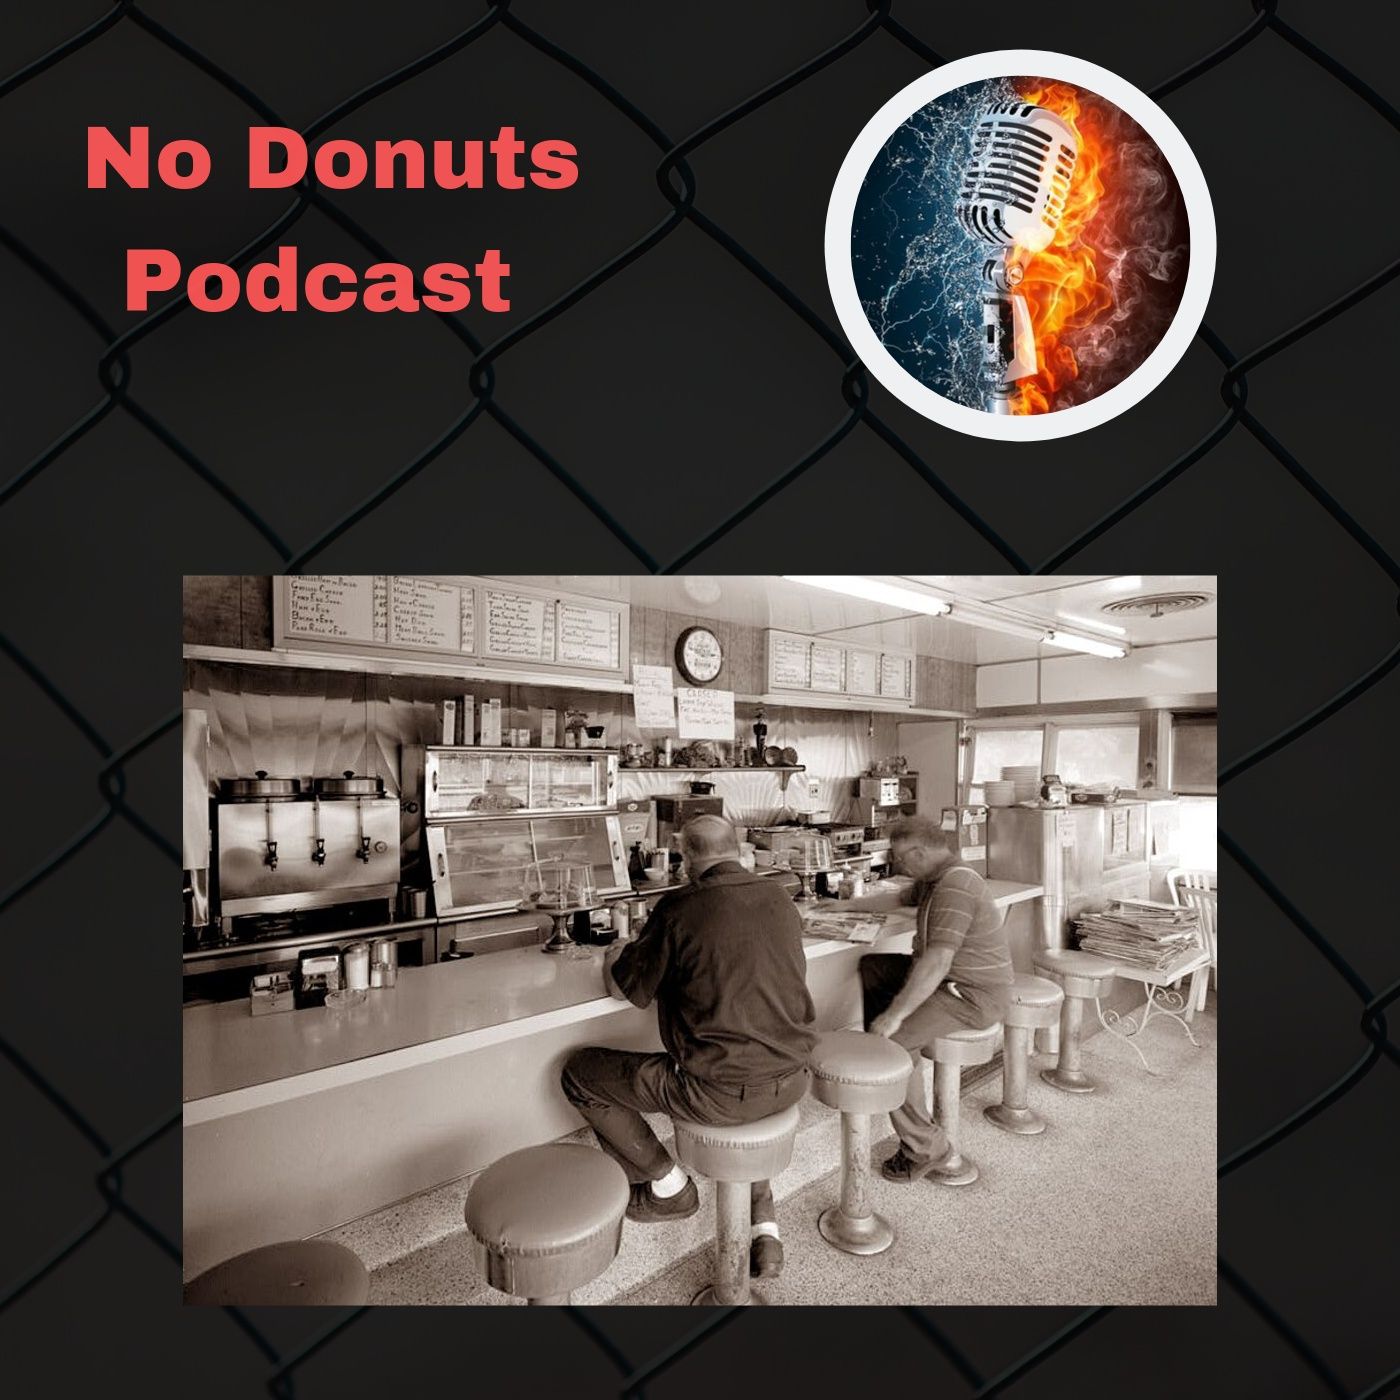 No Donuts Podcast